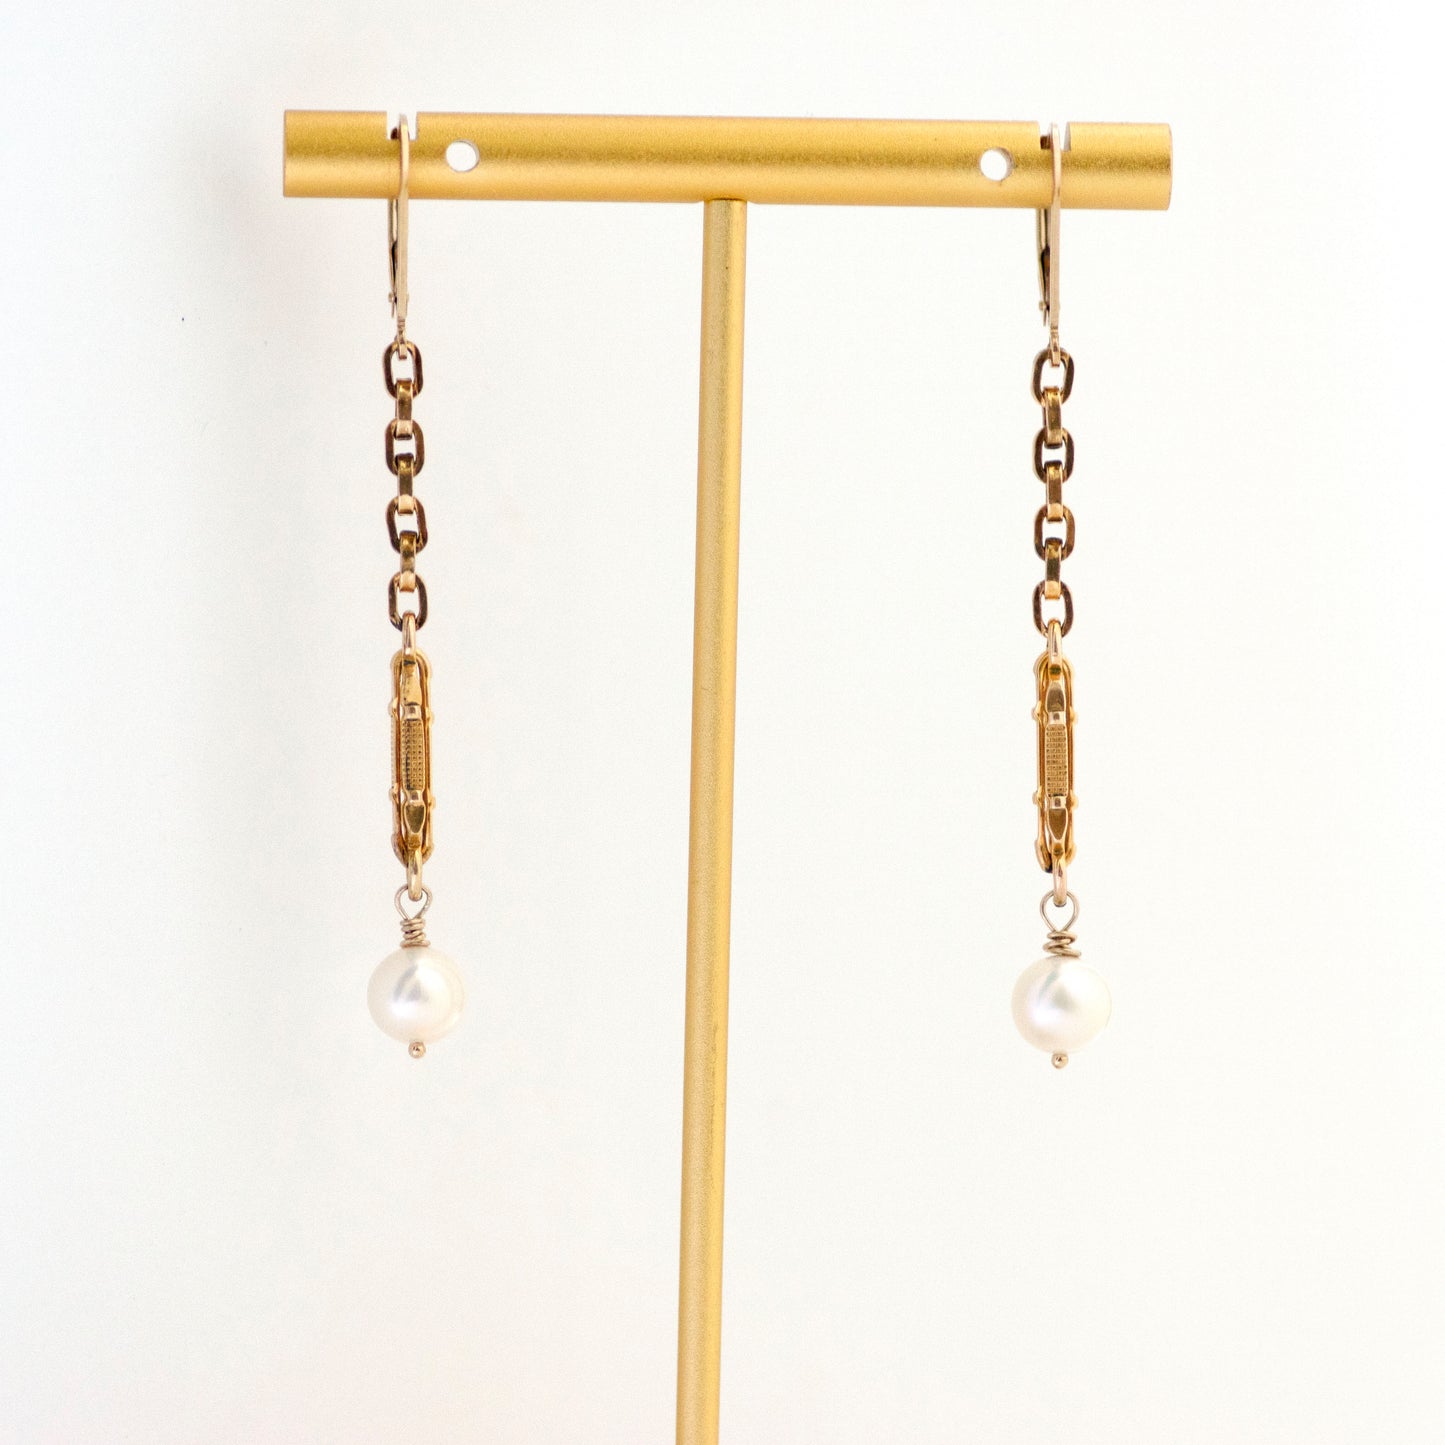 Long Dangling Pearl Drop Antique Watch Chain Earrings hanging on gold tone earring T stand.